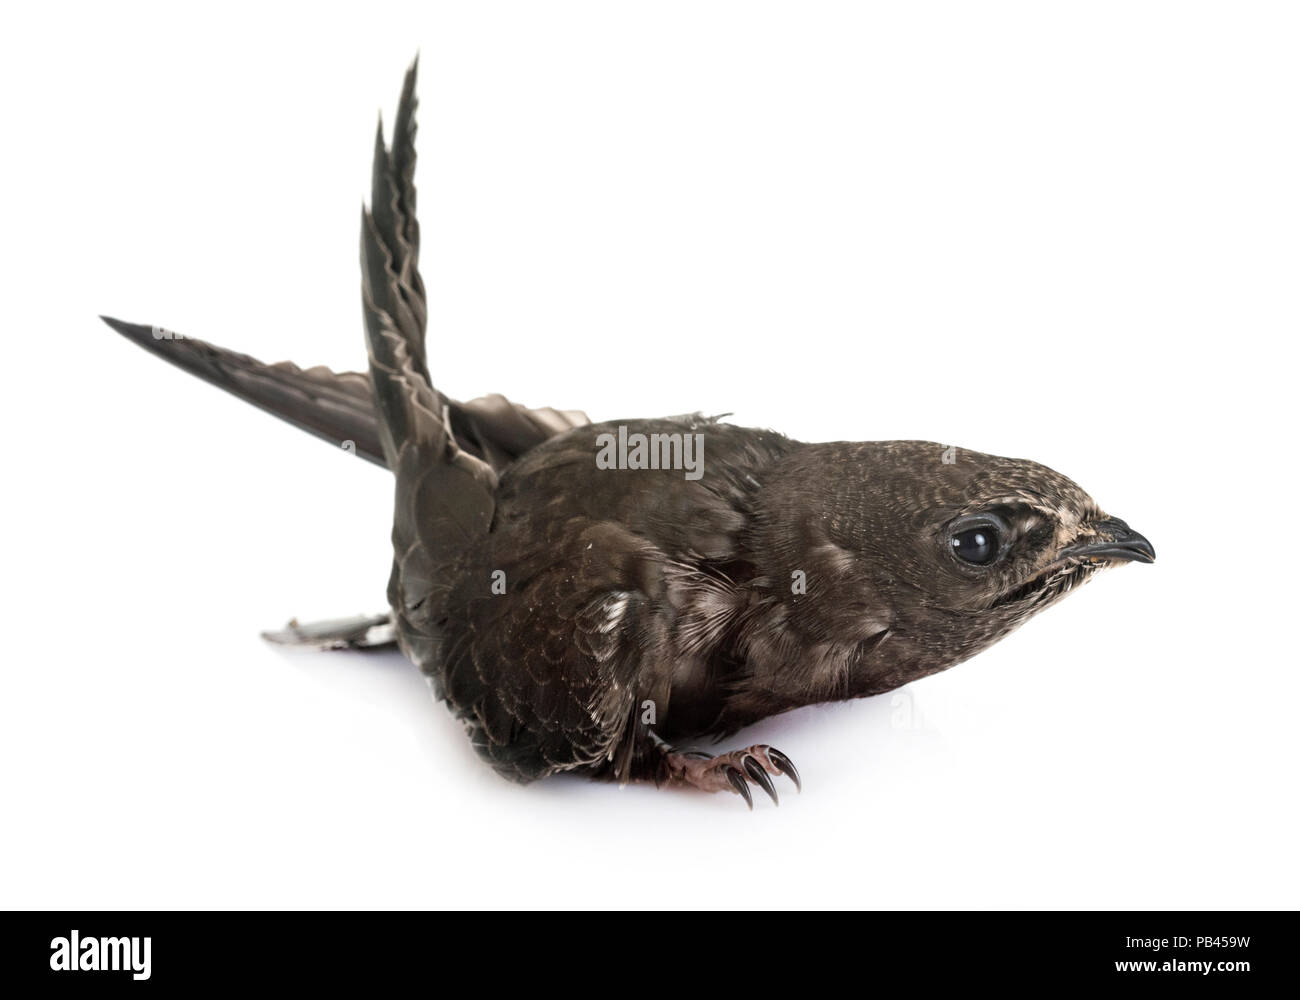 Common swift in front of white background Stock Photo